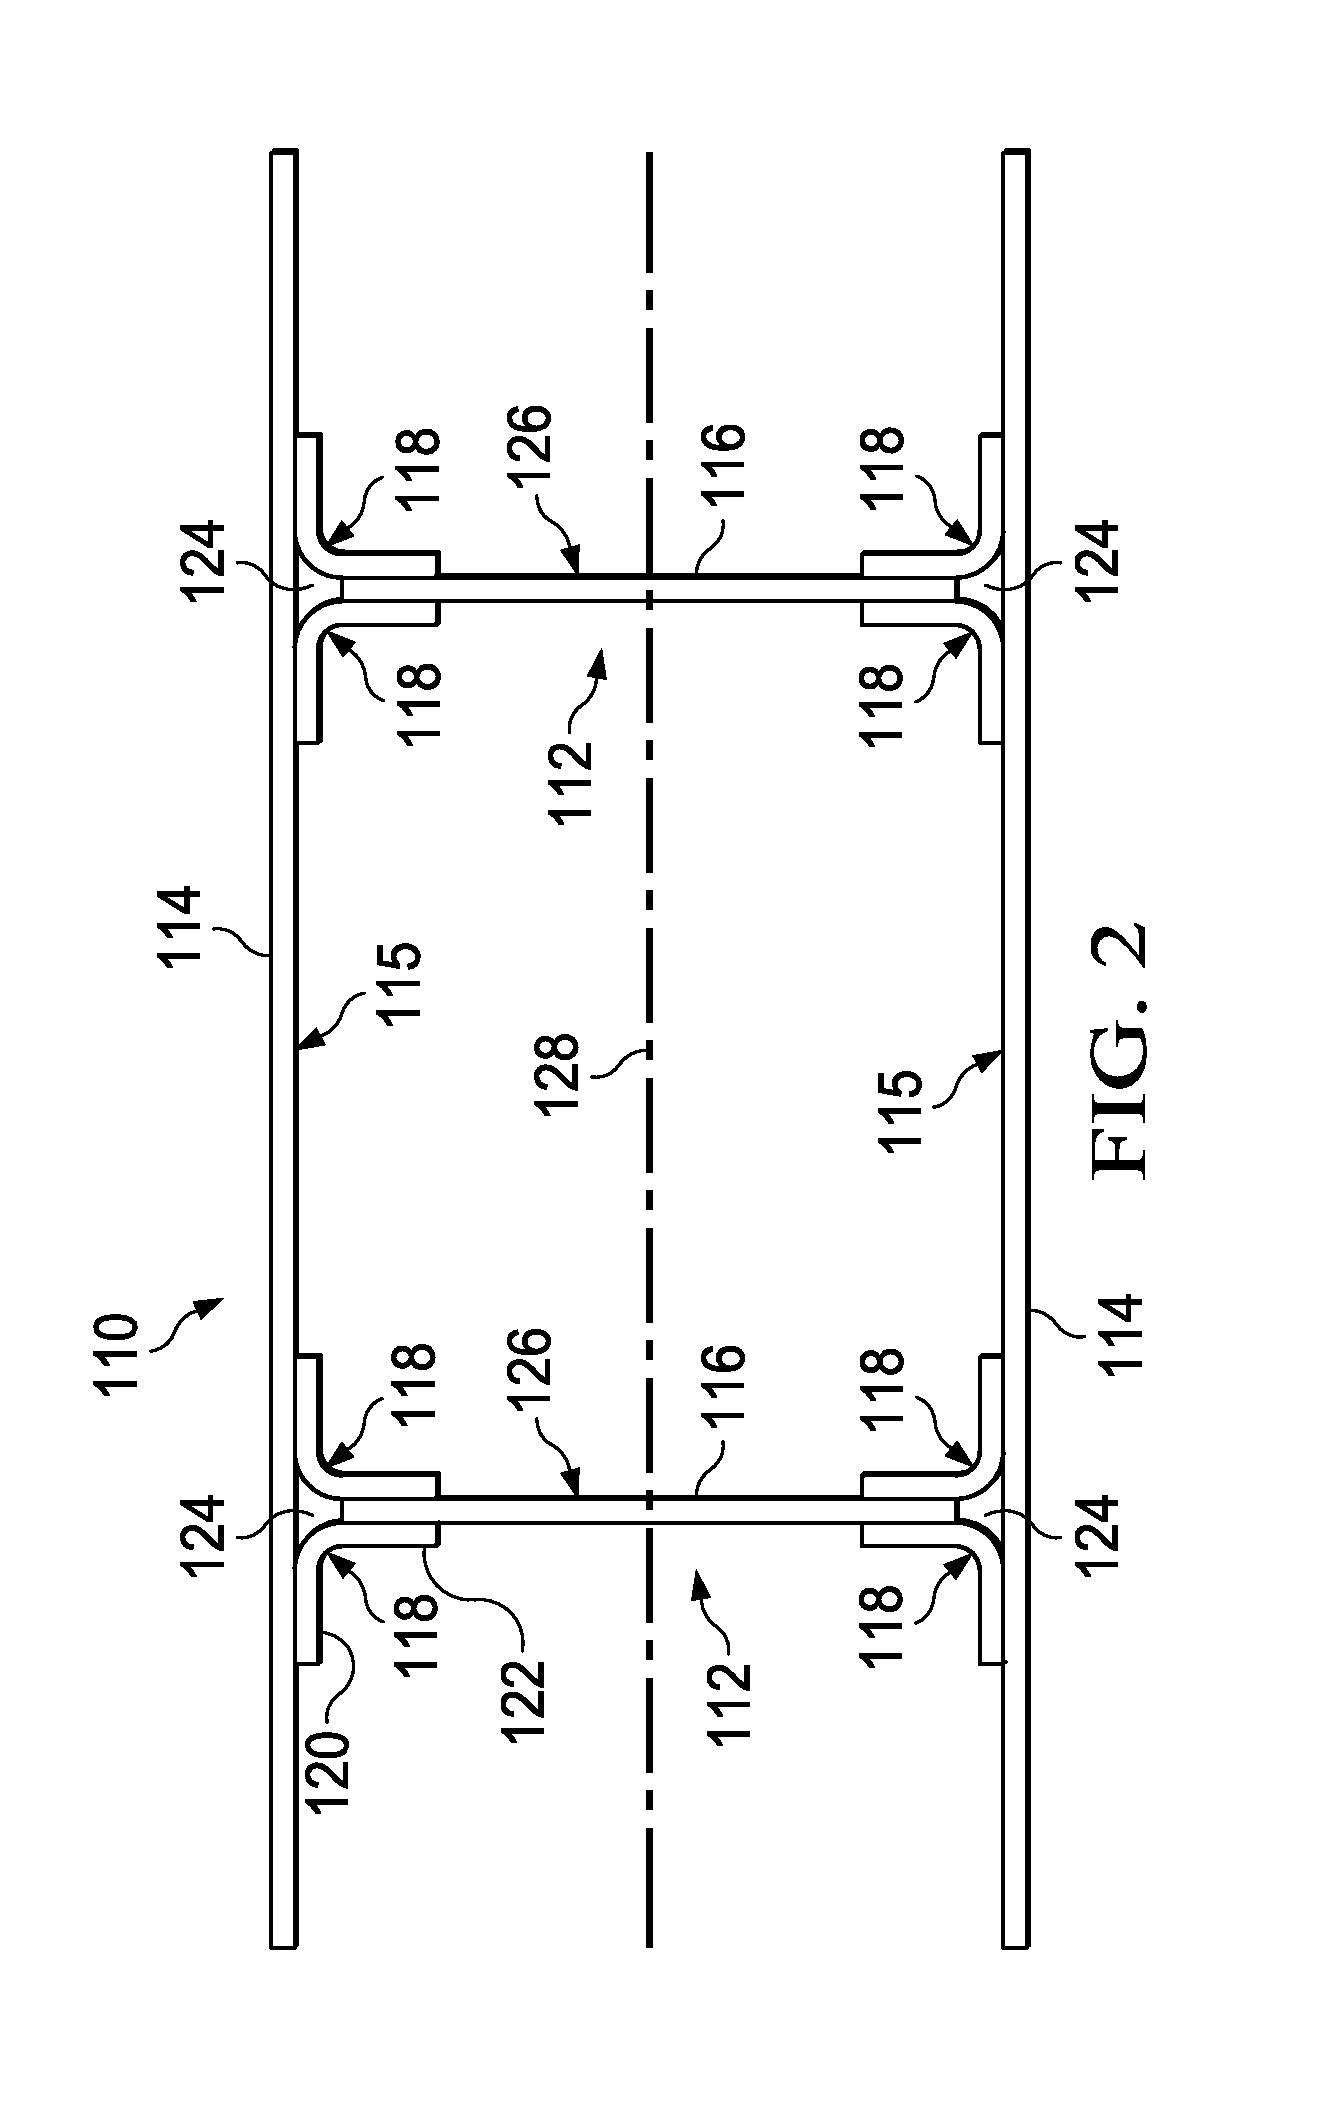 Method and apparatus for fabricating large scale integrated airfoils